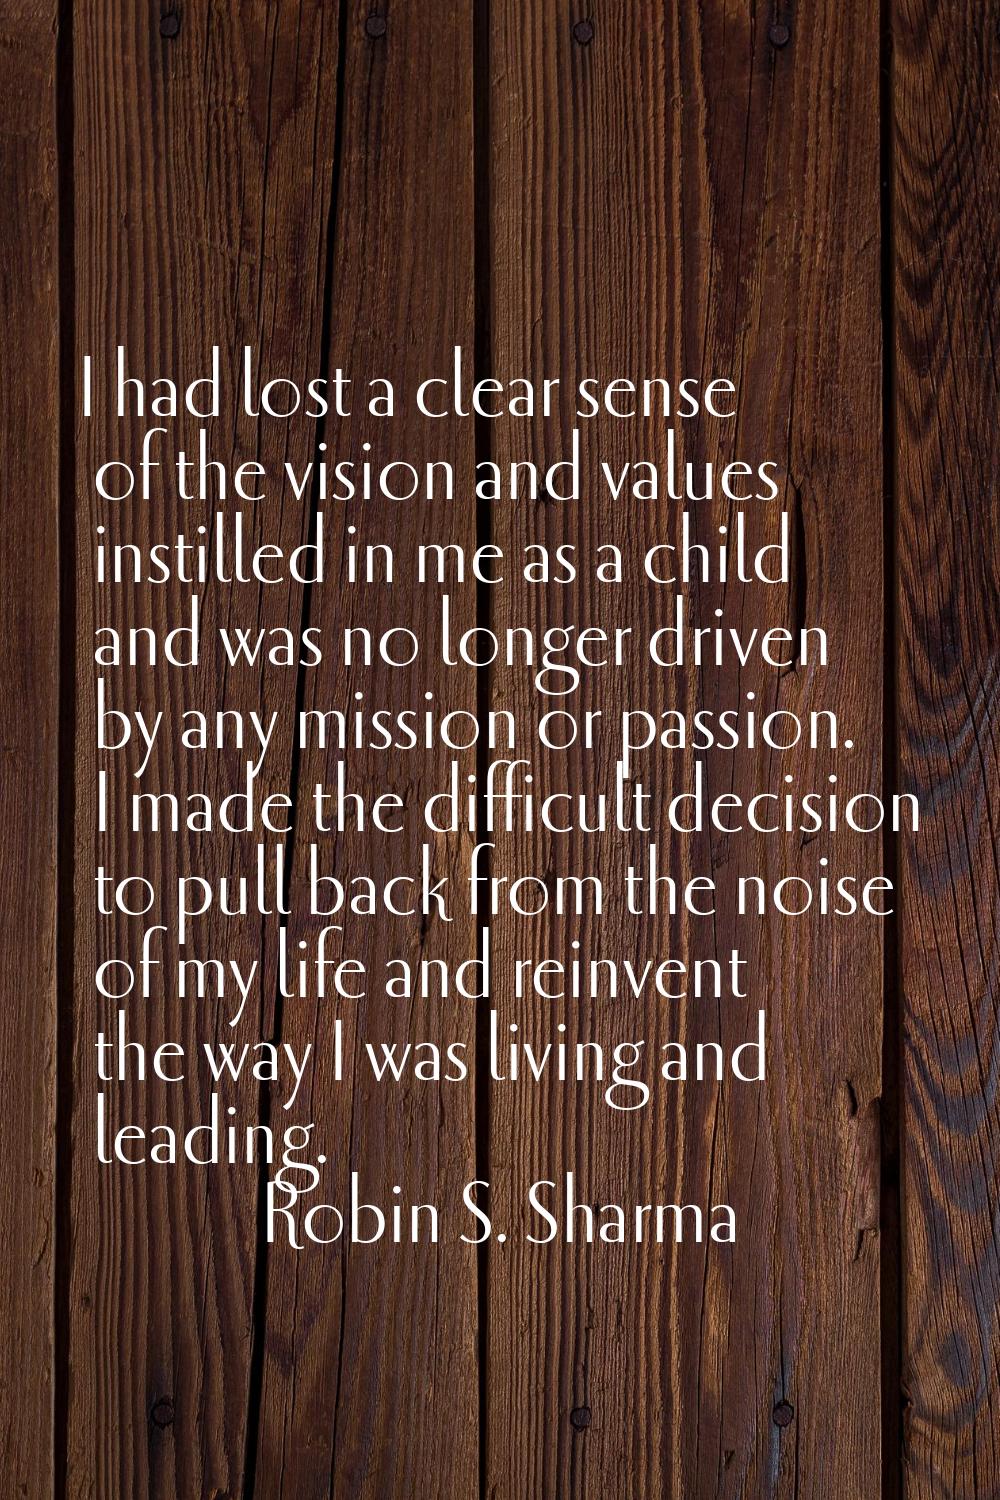 I had lost a clear sense of the vision and values instilled in me as a child and was no longer driv